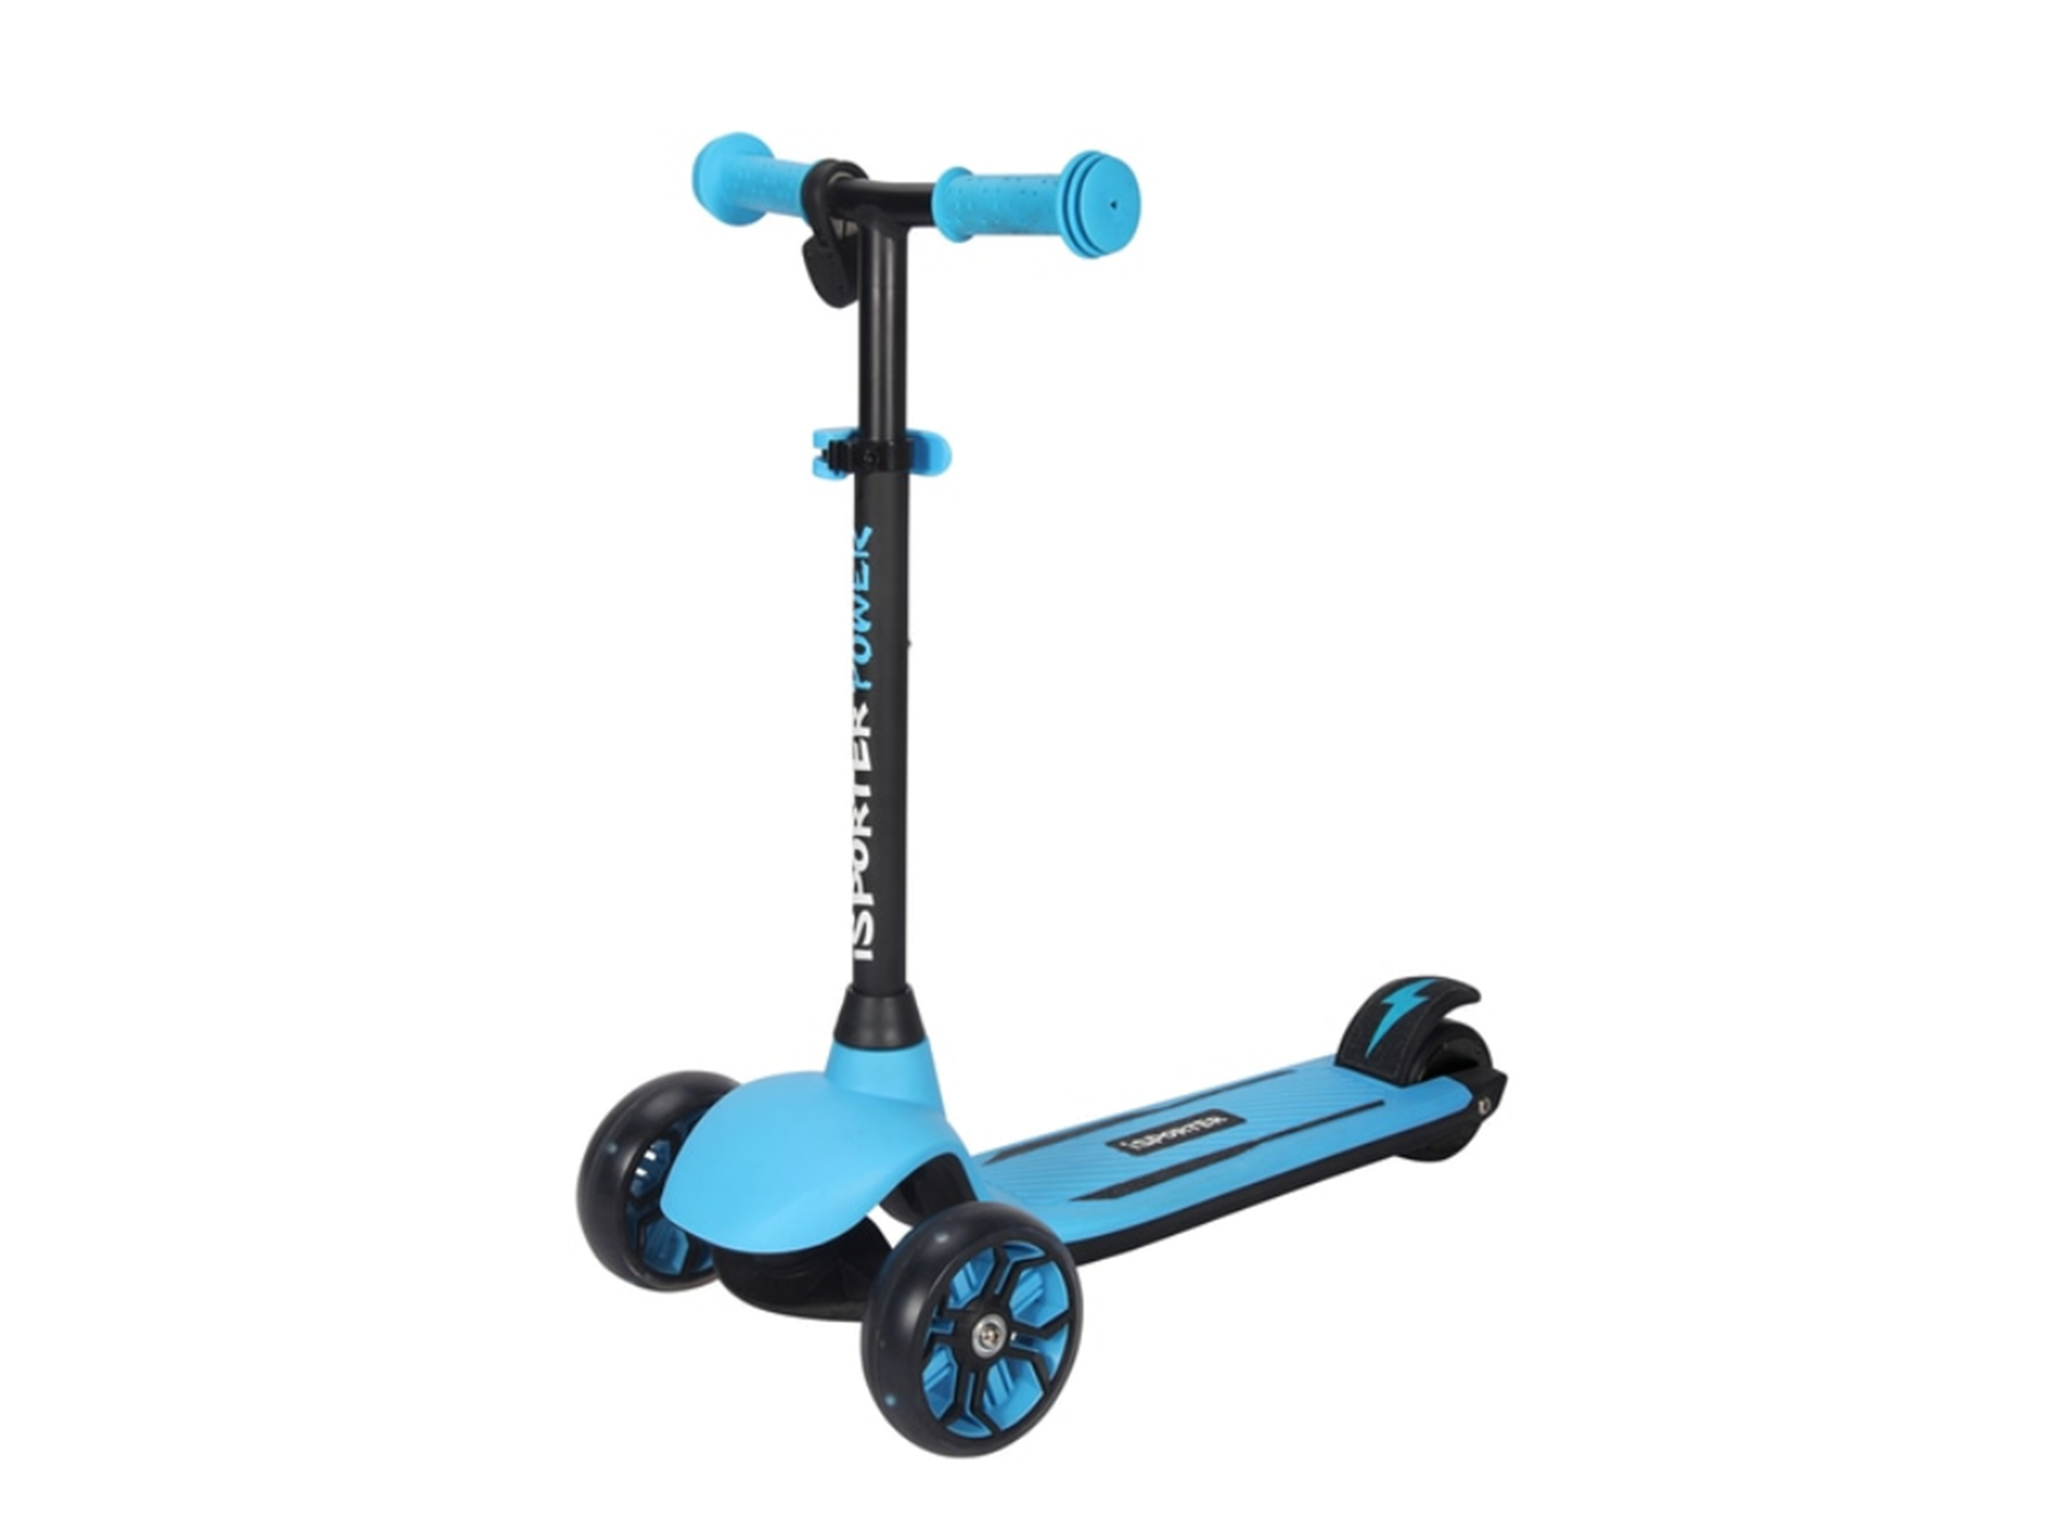 three wheel scooter for 8 year old